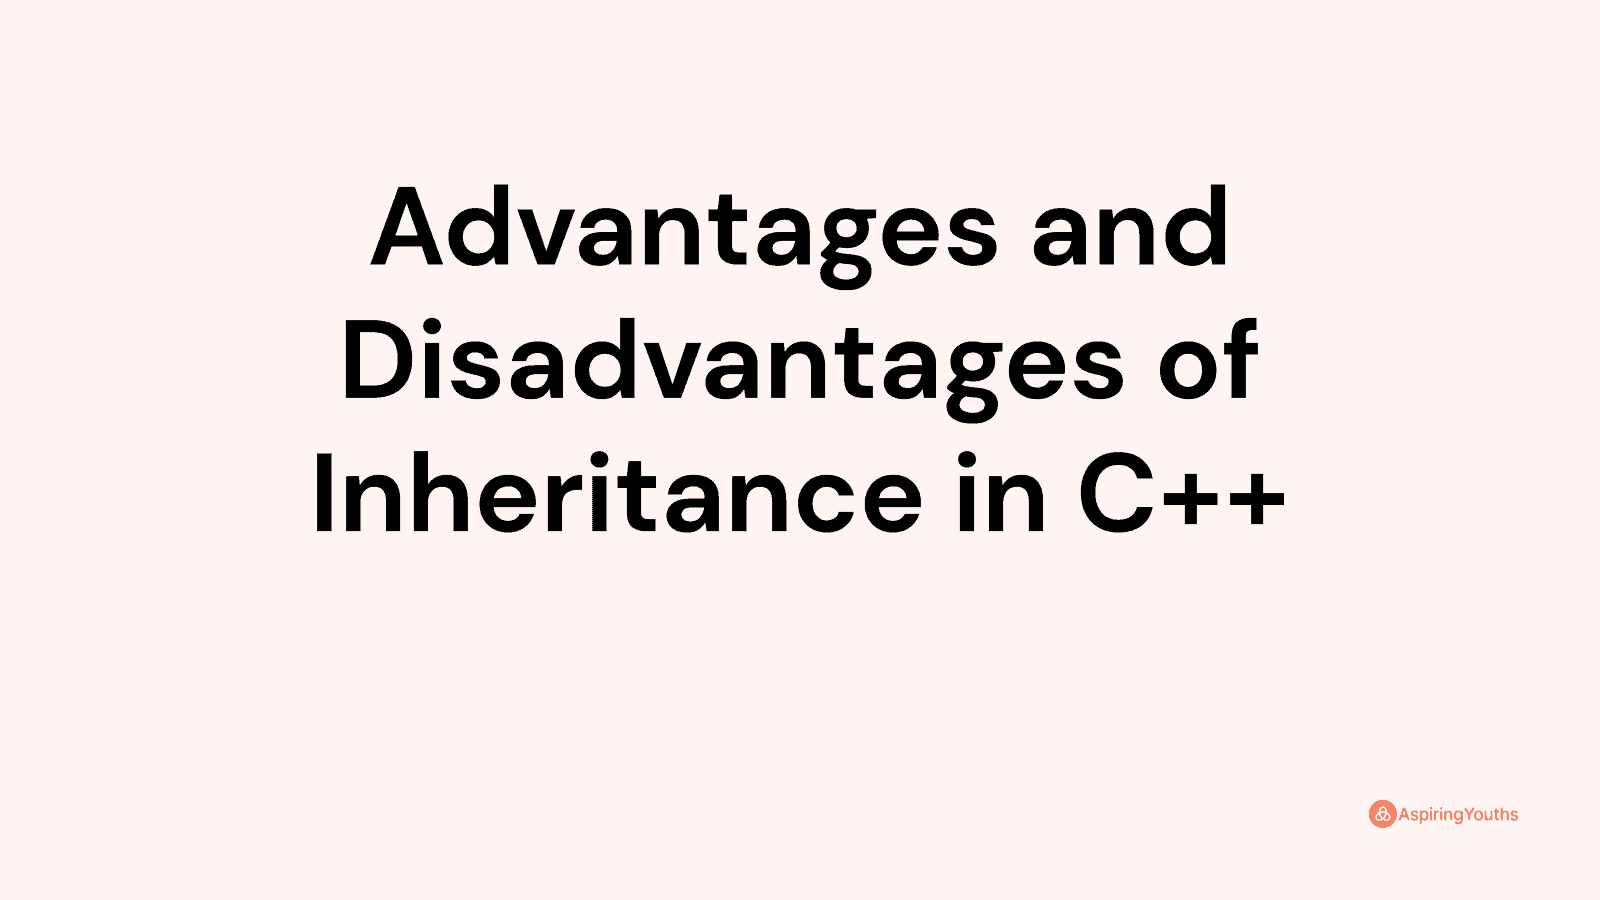 Advantages and disadvantages of Inheritance in C++